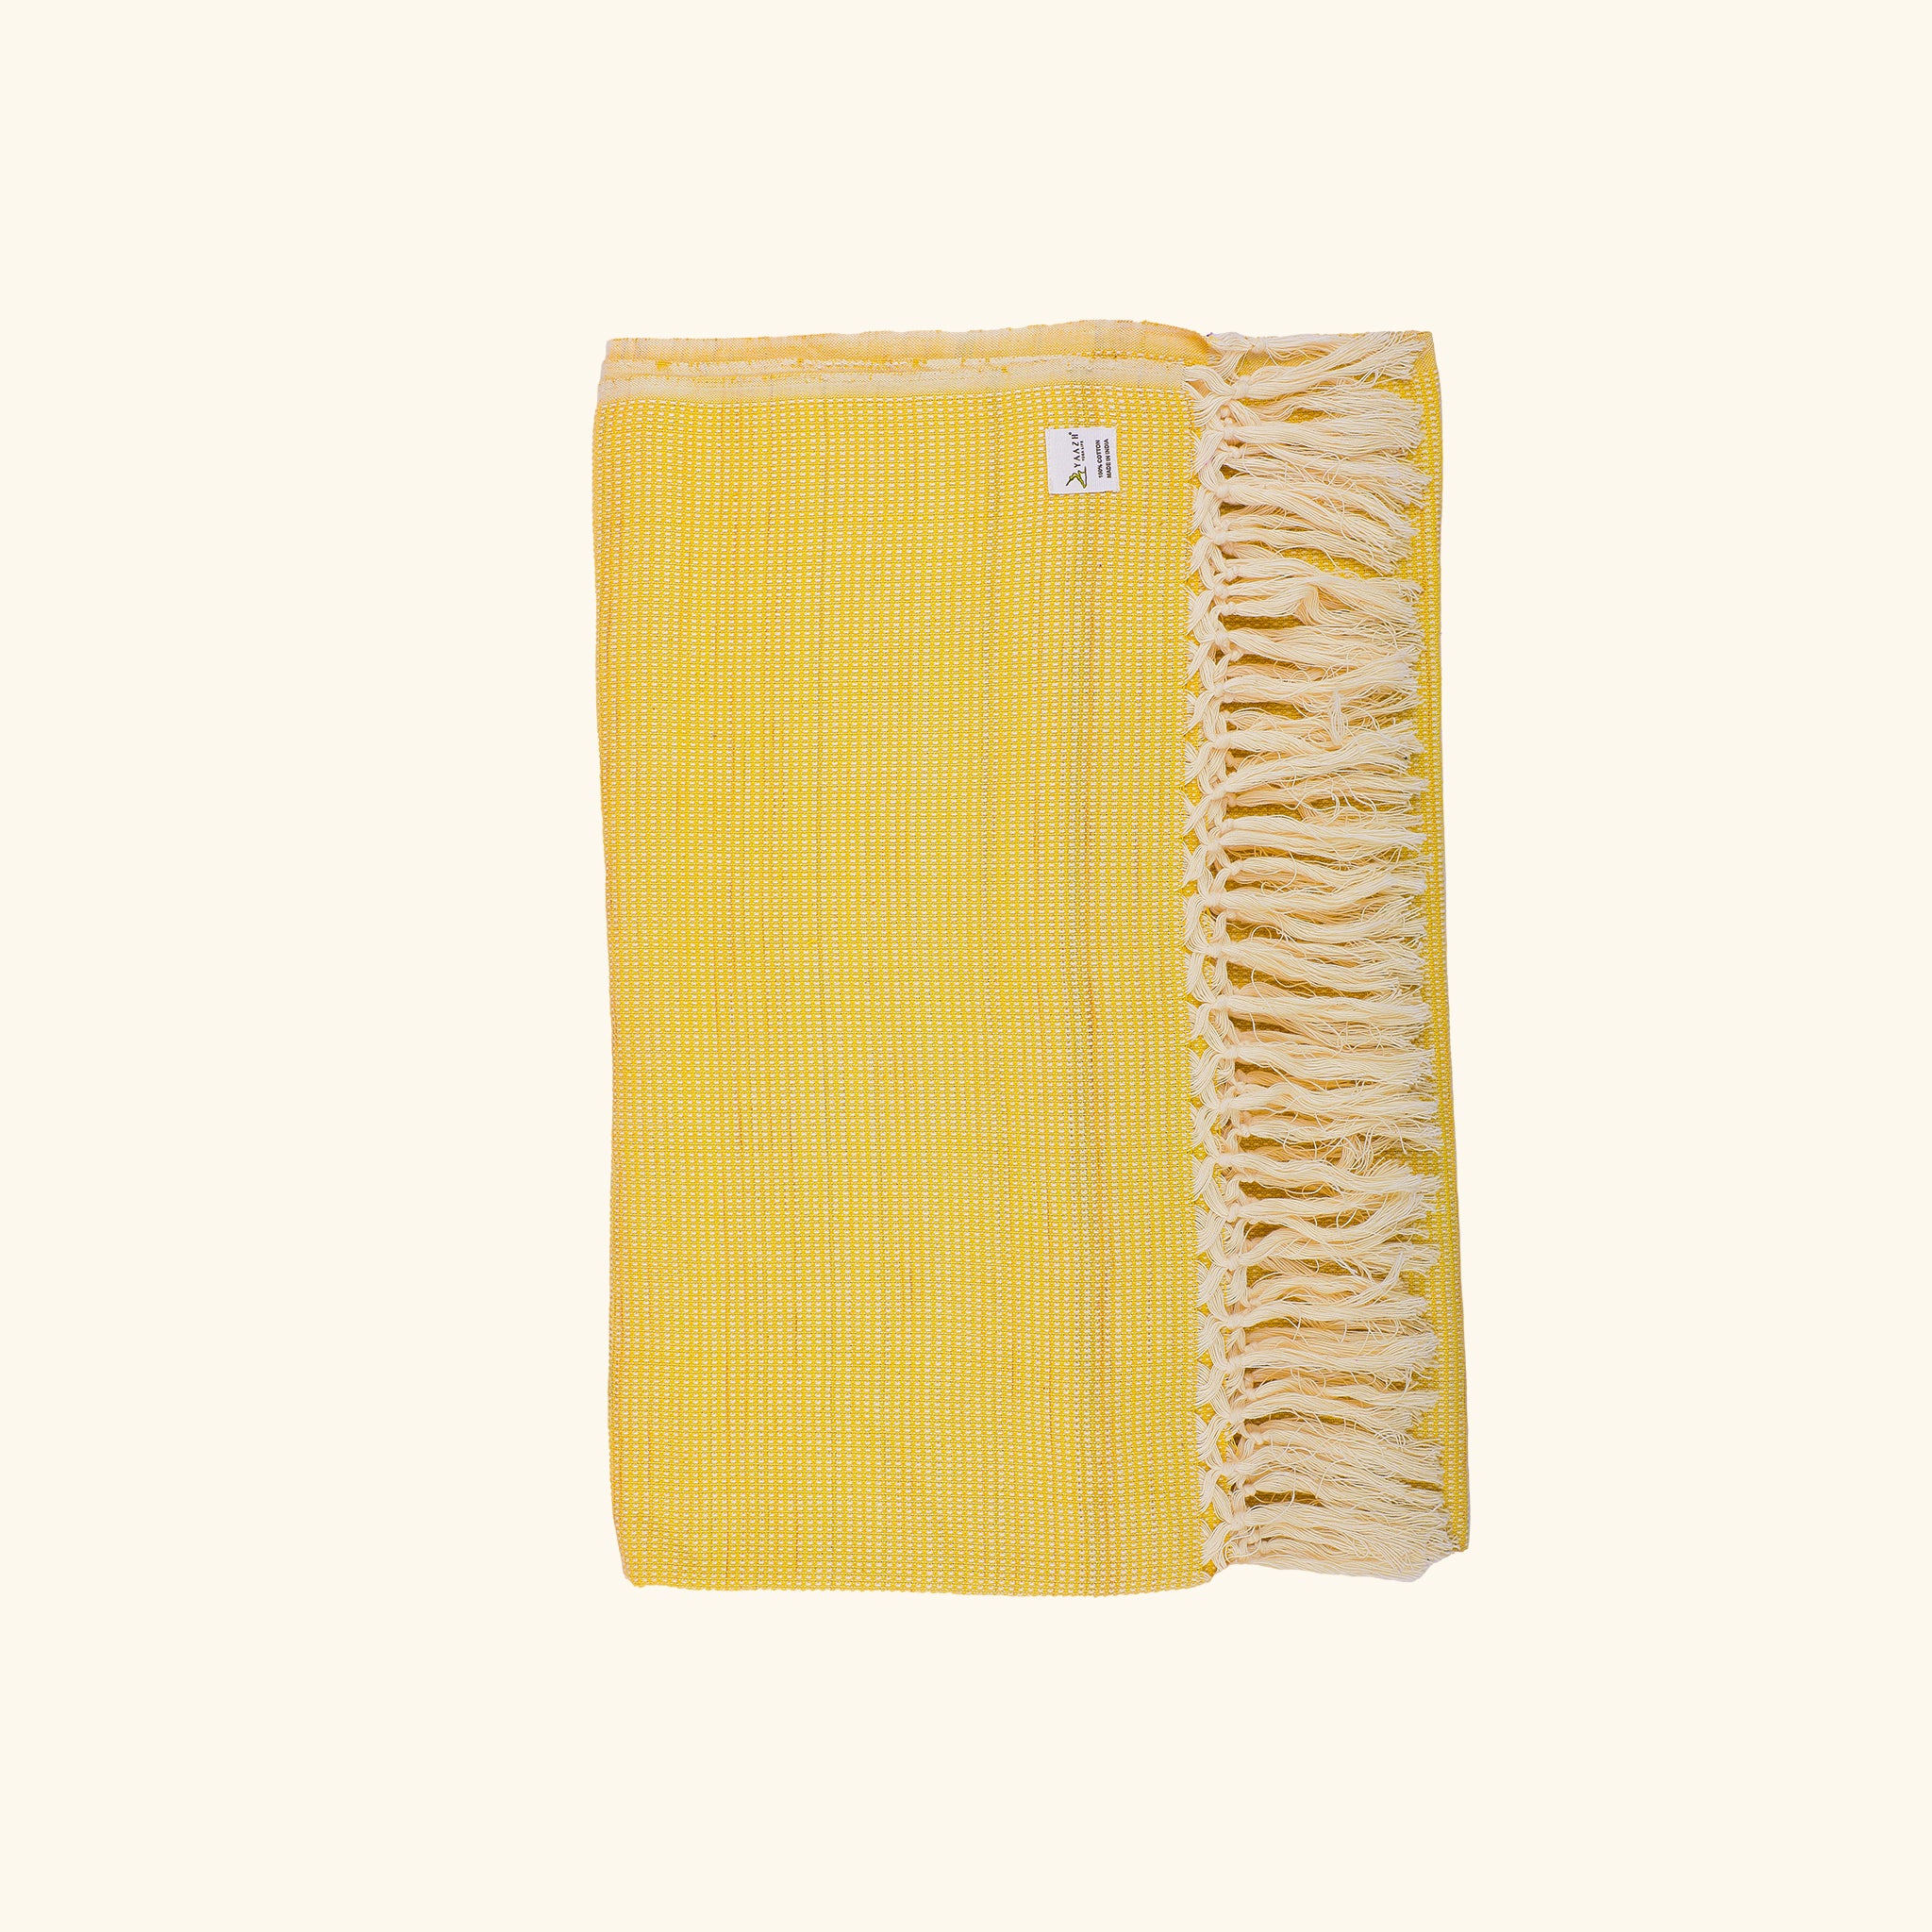 Cotton Herbal Dyed Towel Handloomed